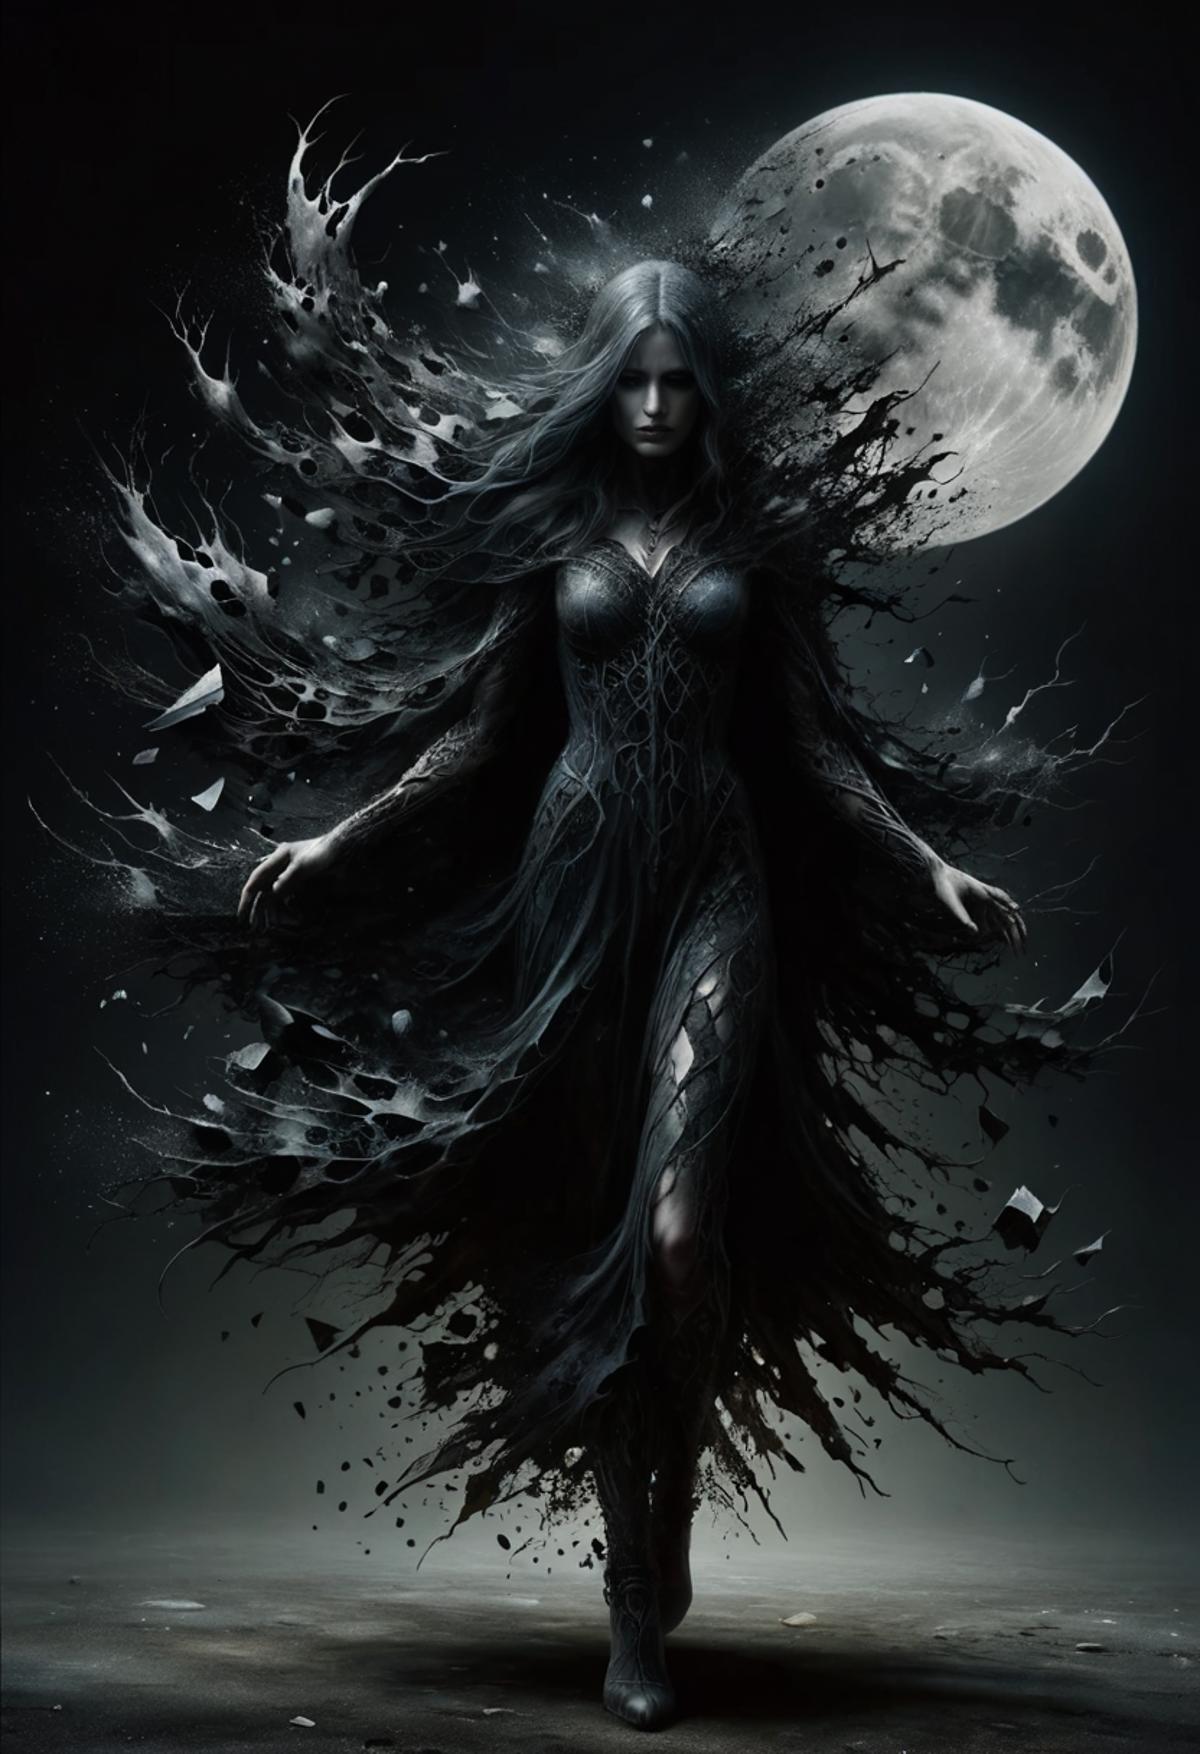 A painting of a woman with black hair and a black dress standing in front of the moon.